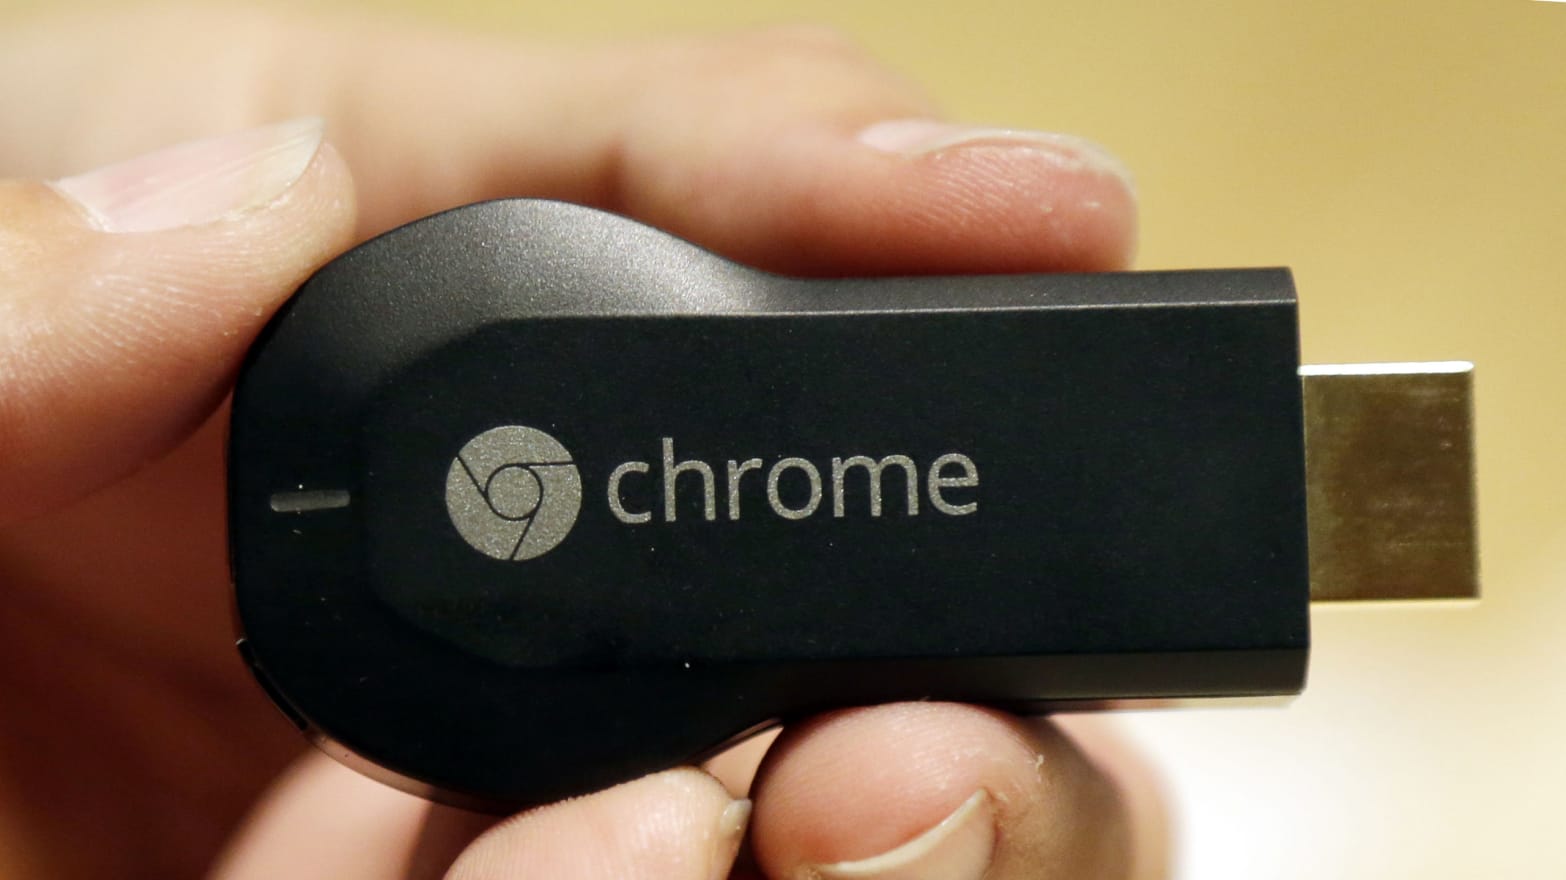 Syd Motley national Google Chromecast Enables Web Streaming Over Television